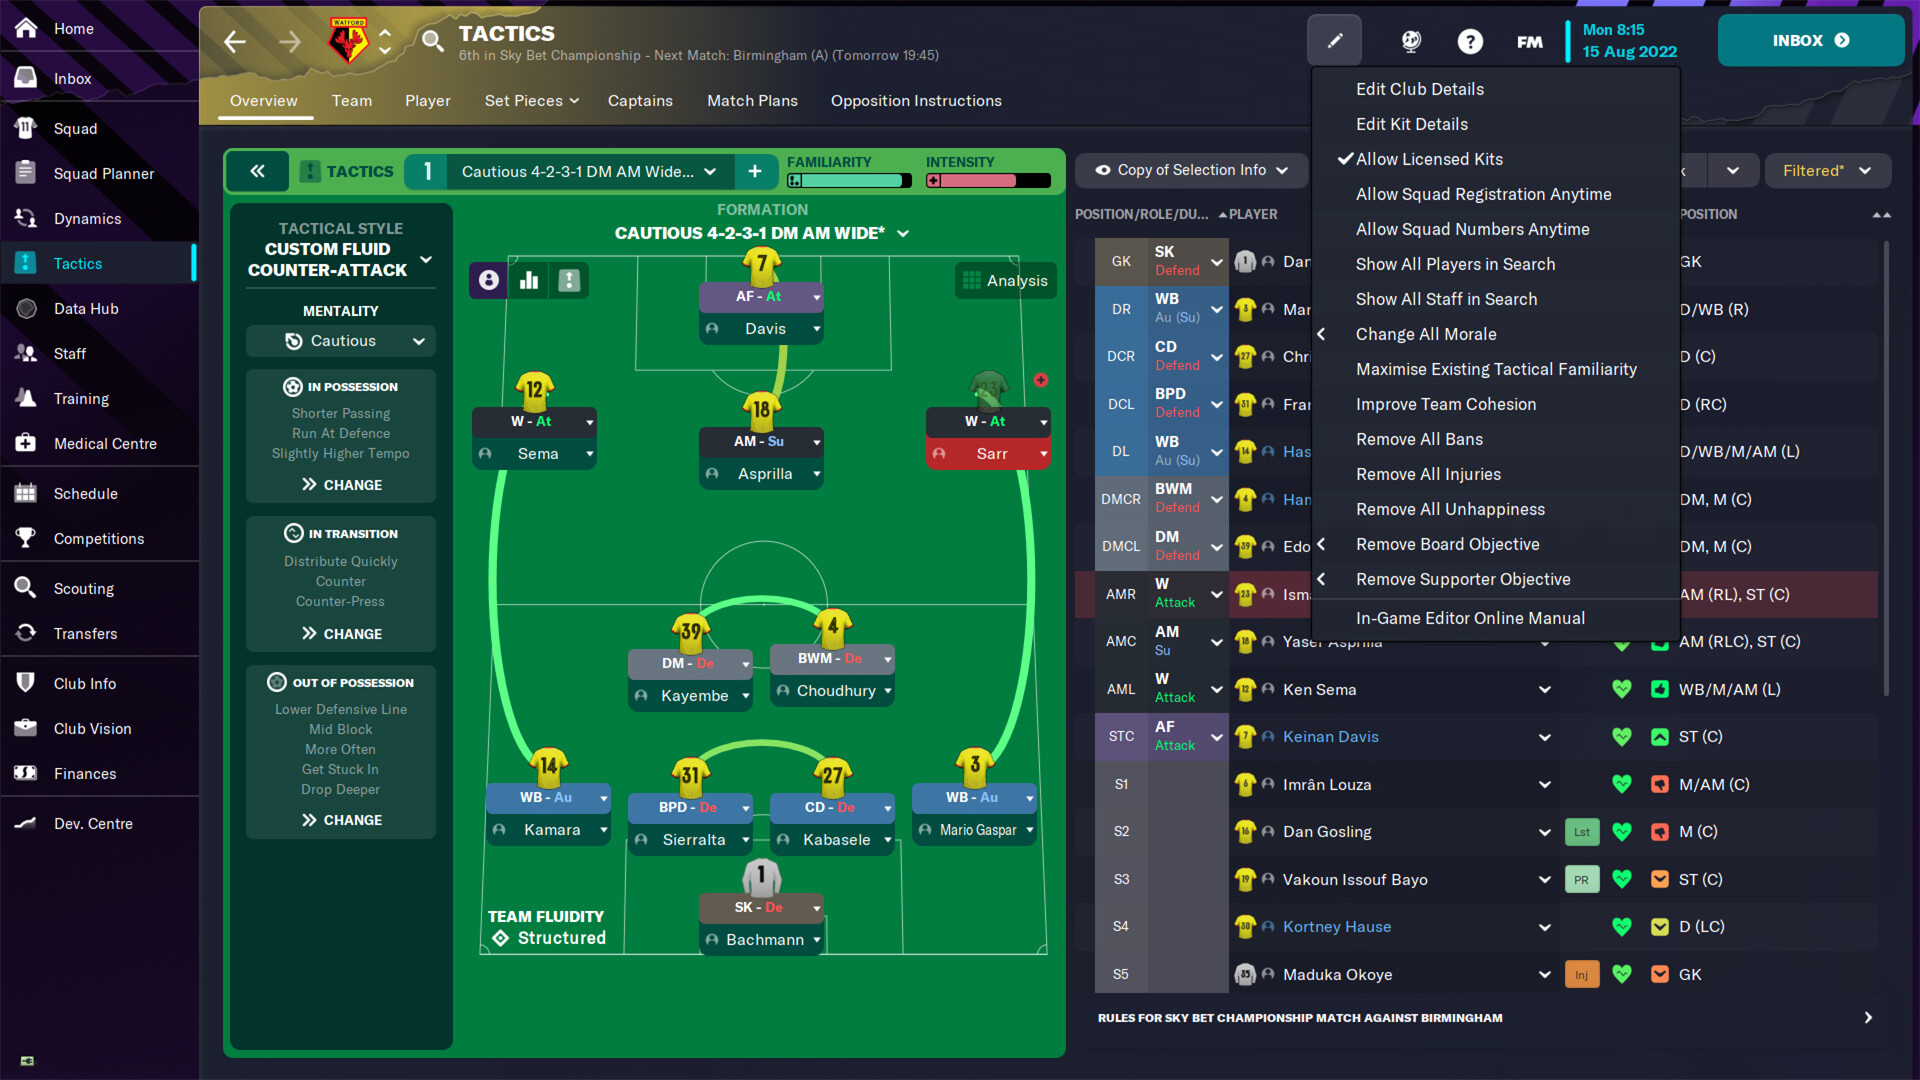 Is Rate my tactic making sense? : r/footballmanagergames